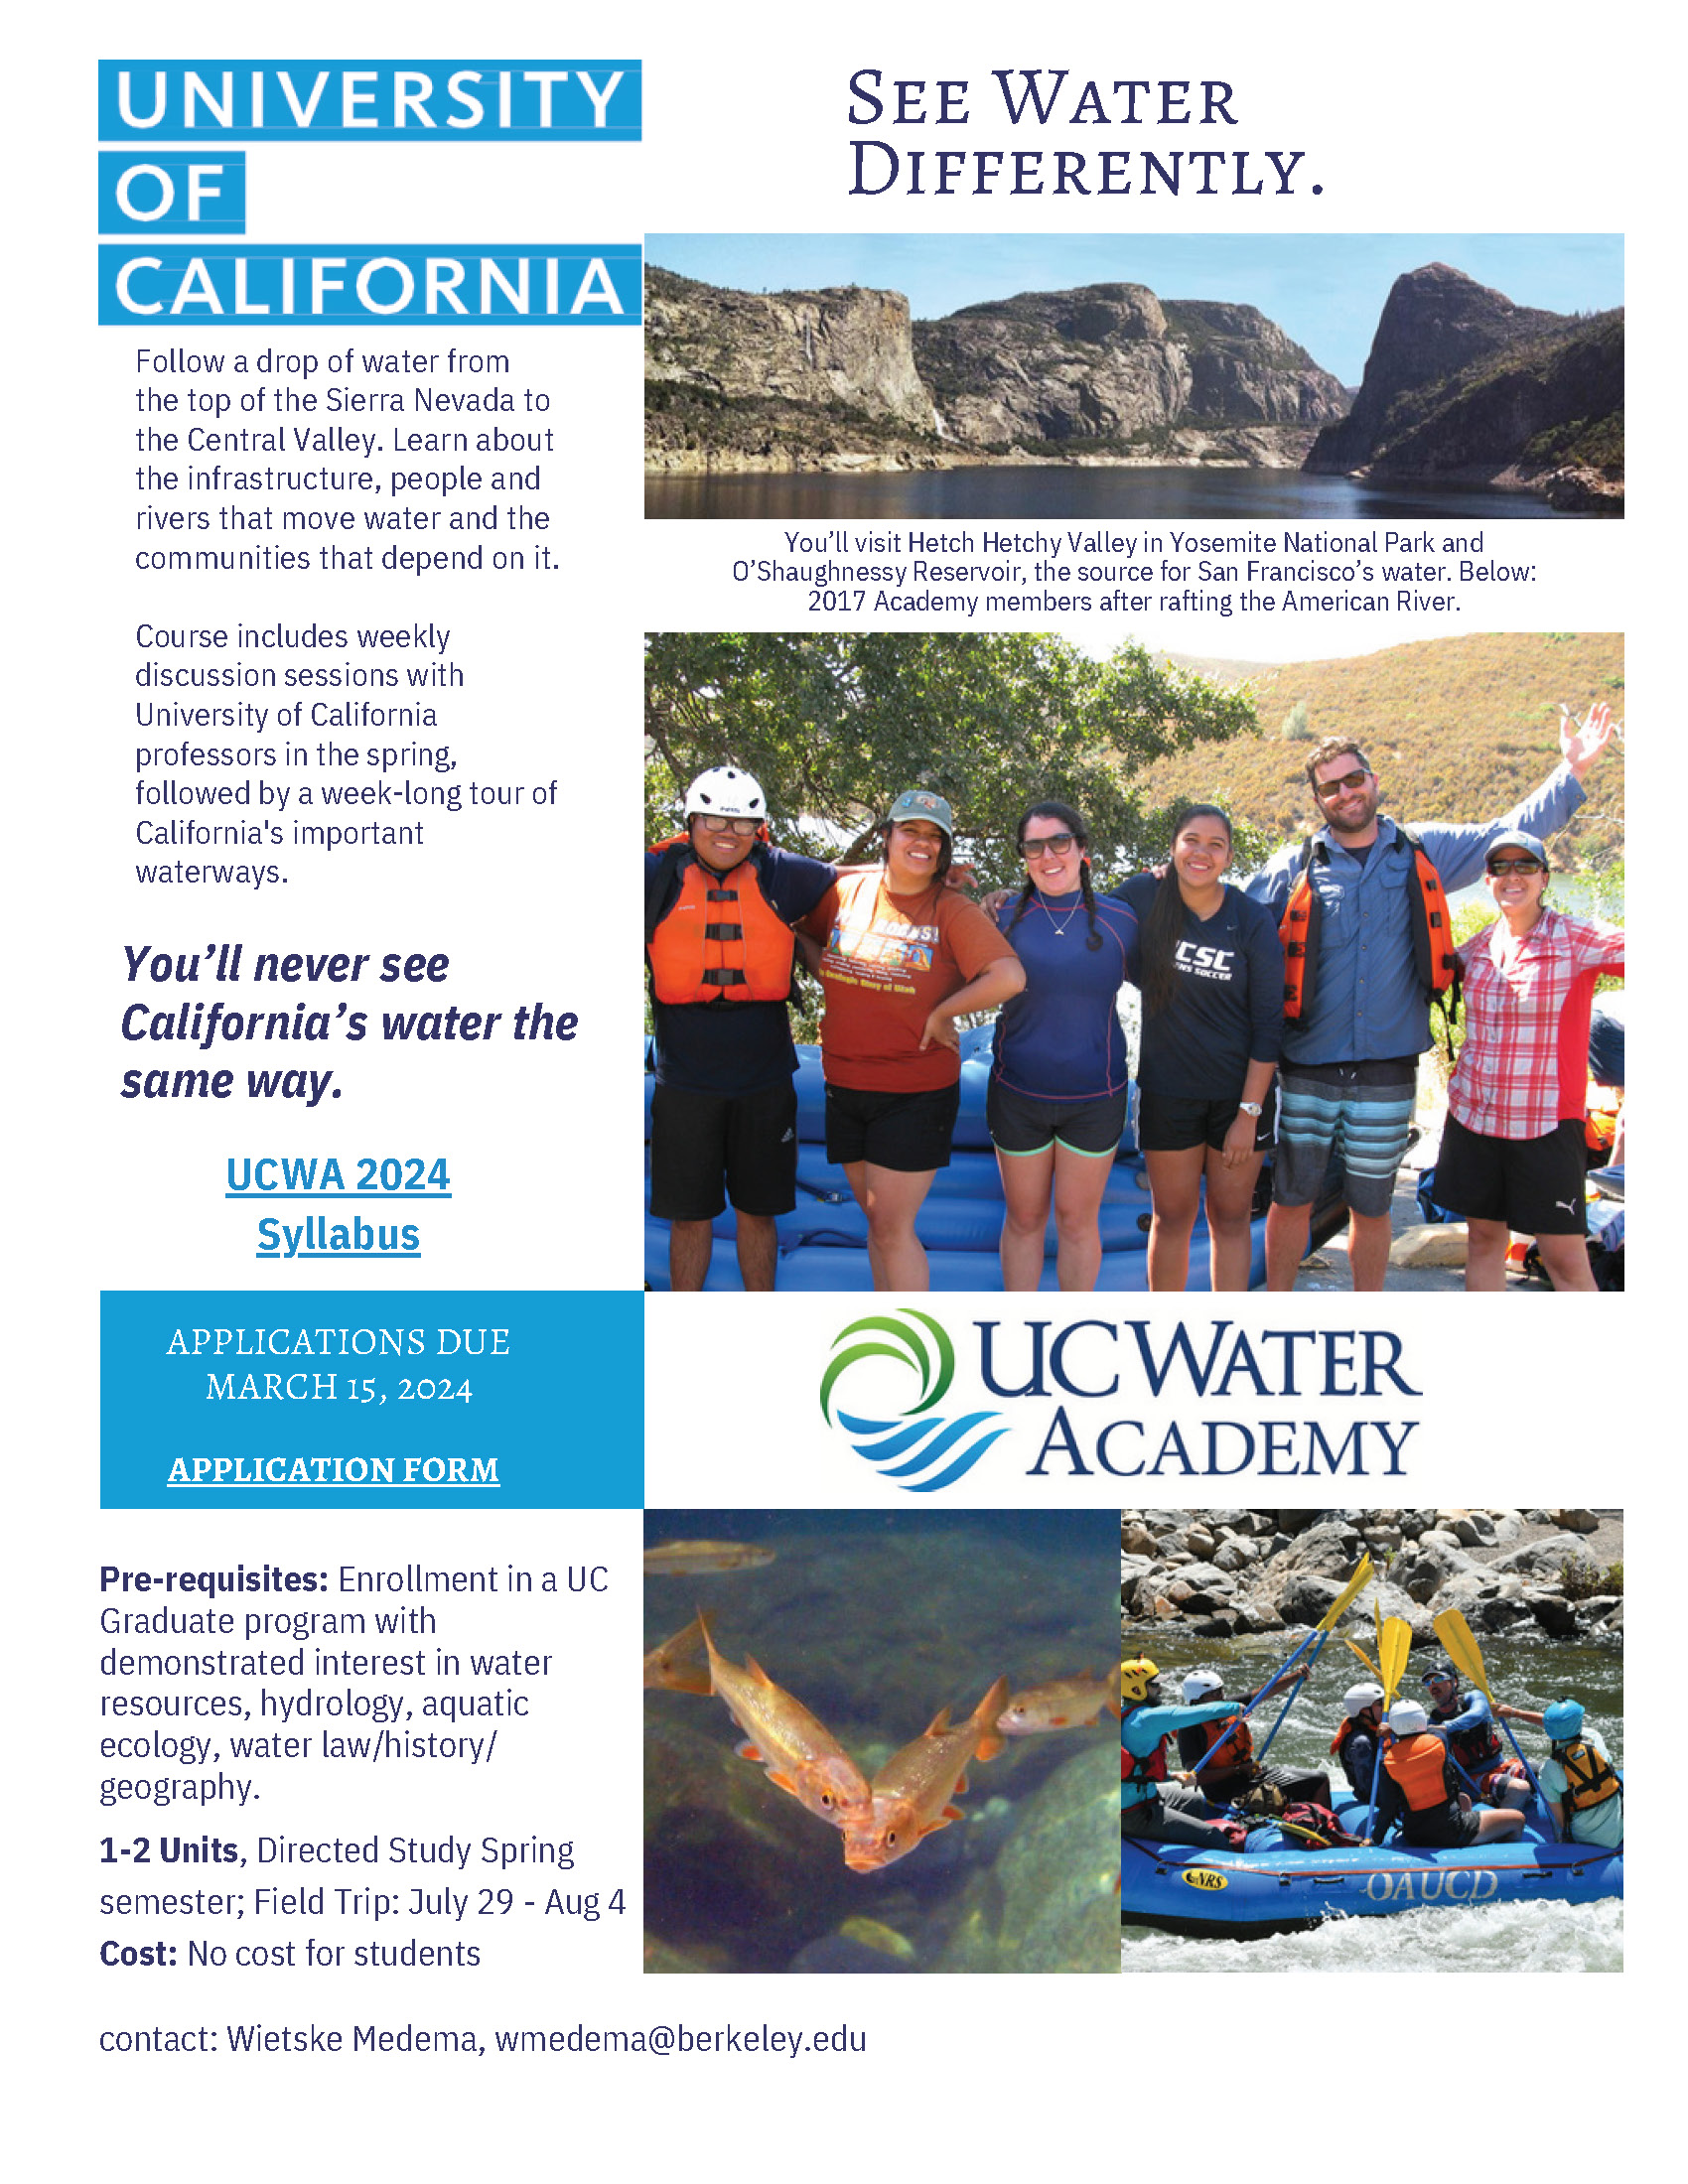 Poster for the 2024 University of California Water Academy that includes images of Hetch Hetchy, past students, white water river rafters, and native fish.